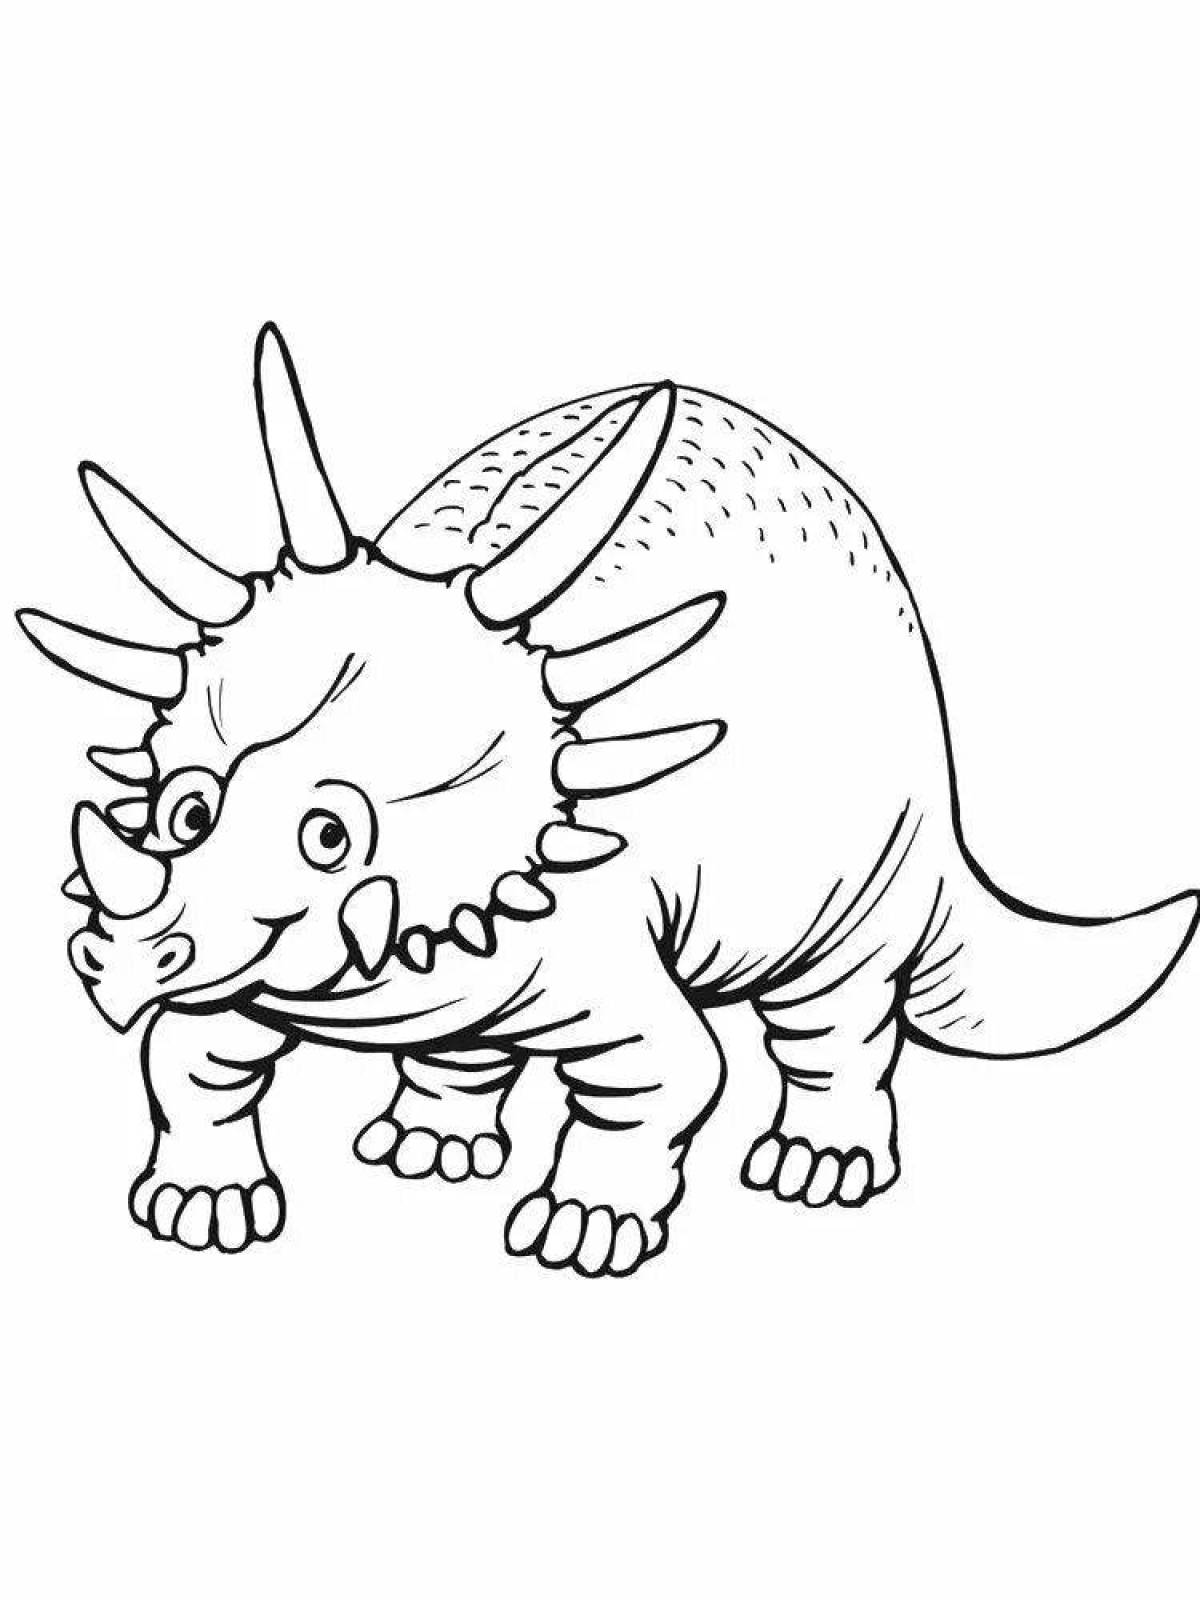 Coloring page wonderful triceratops